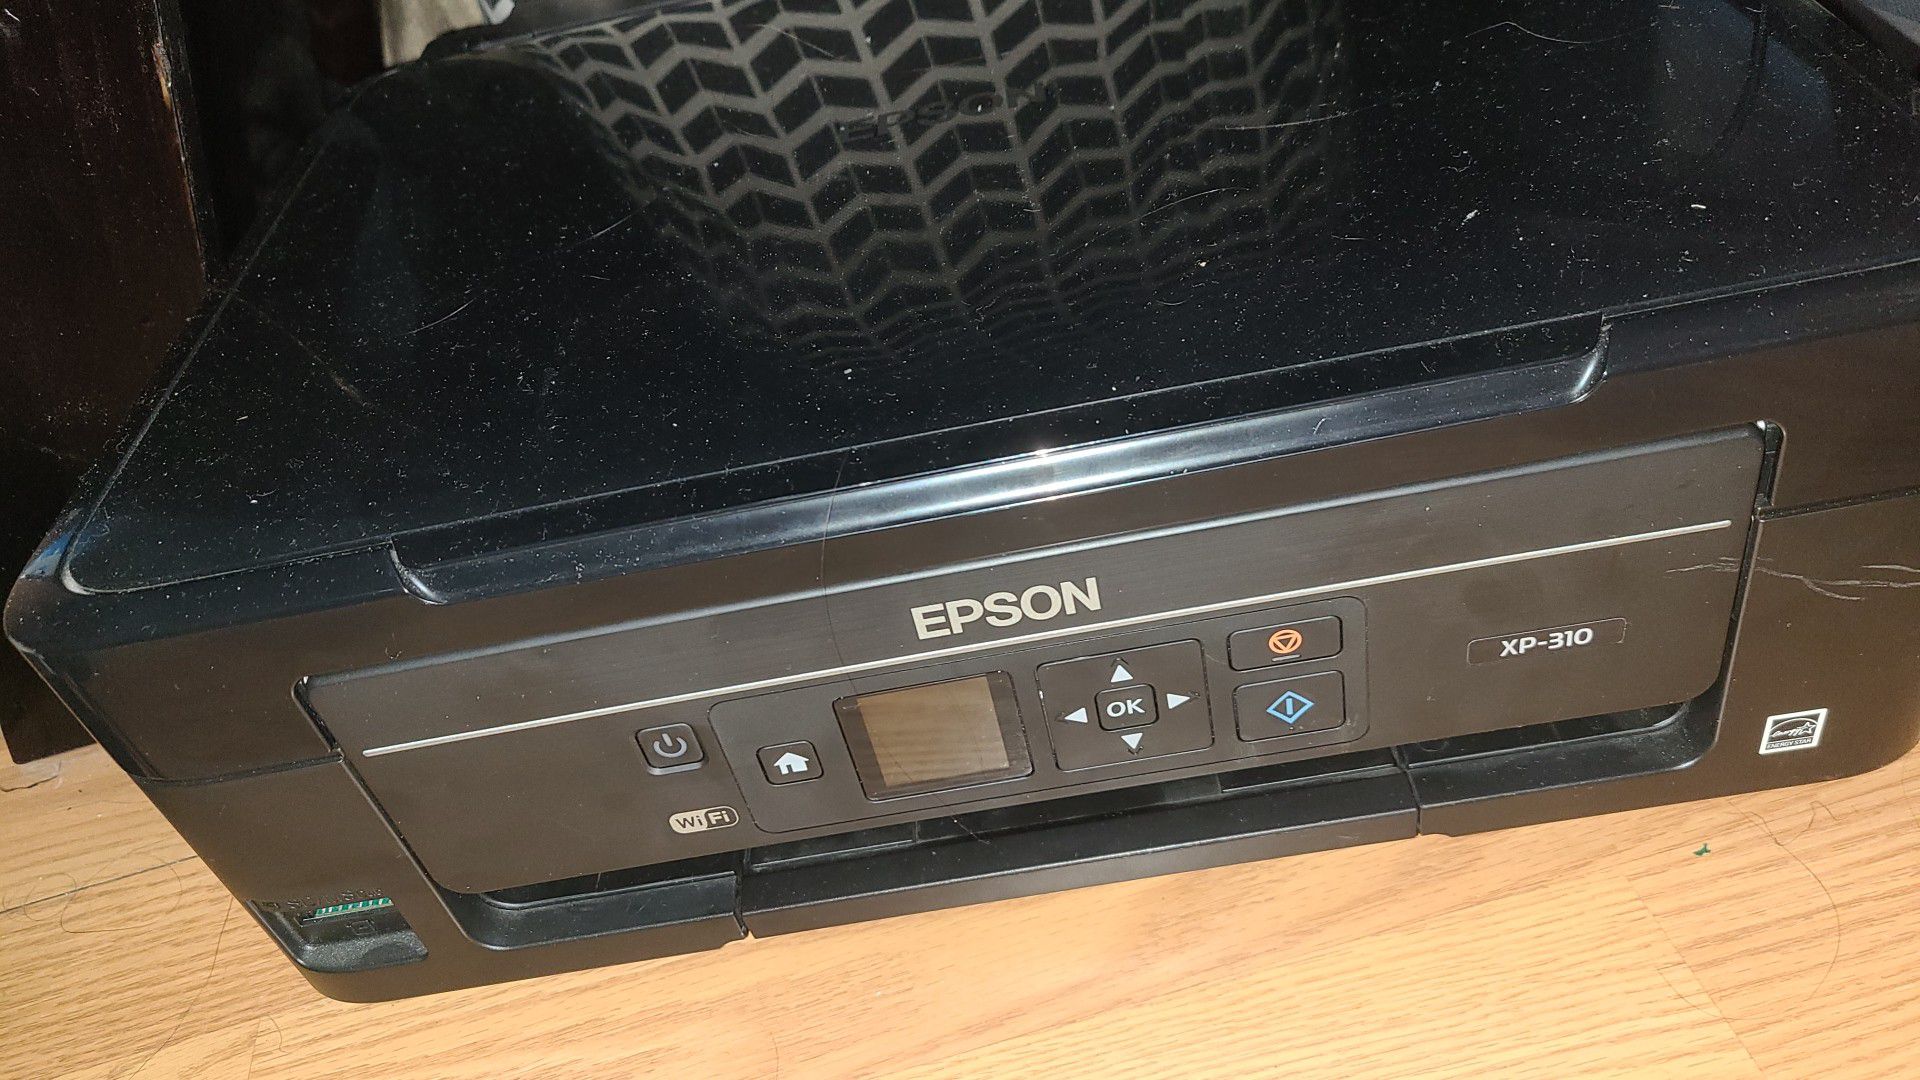 EPSON XP-310 All in One Printer